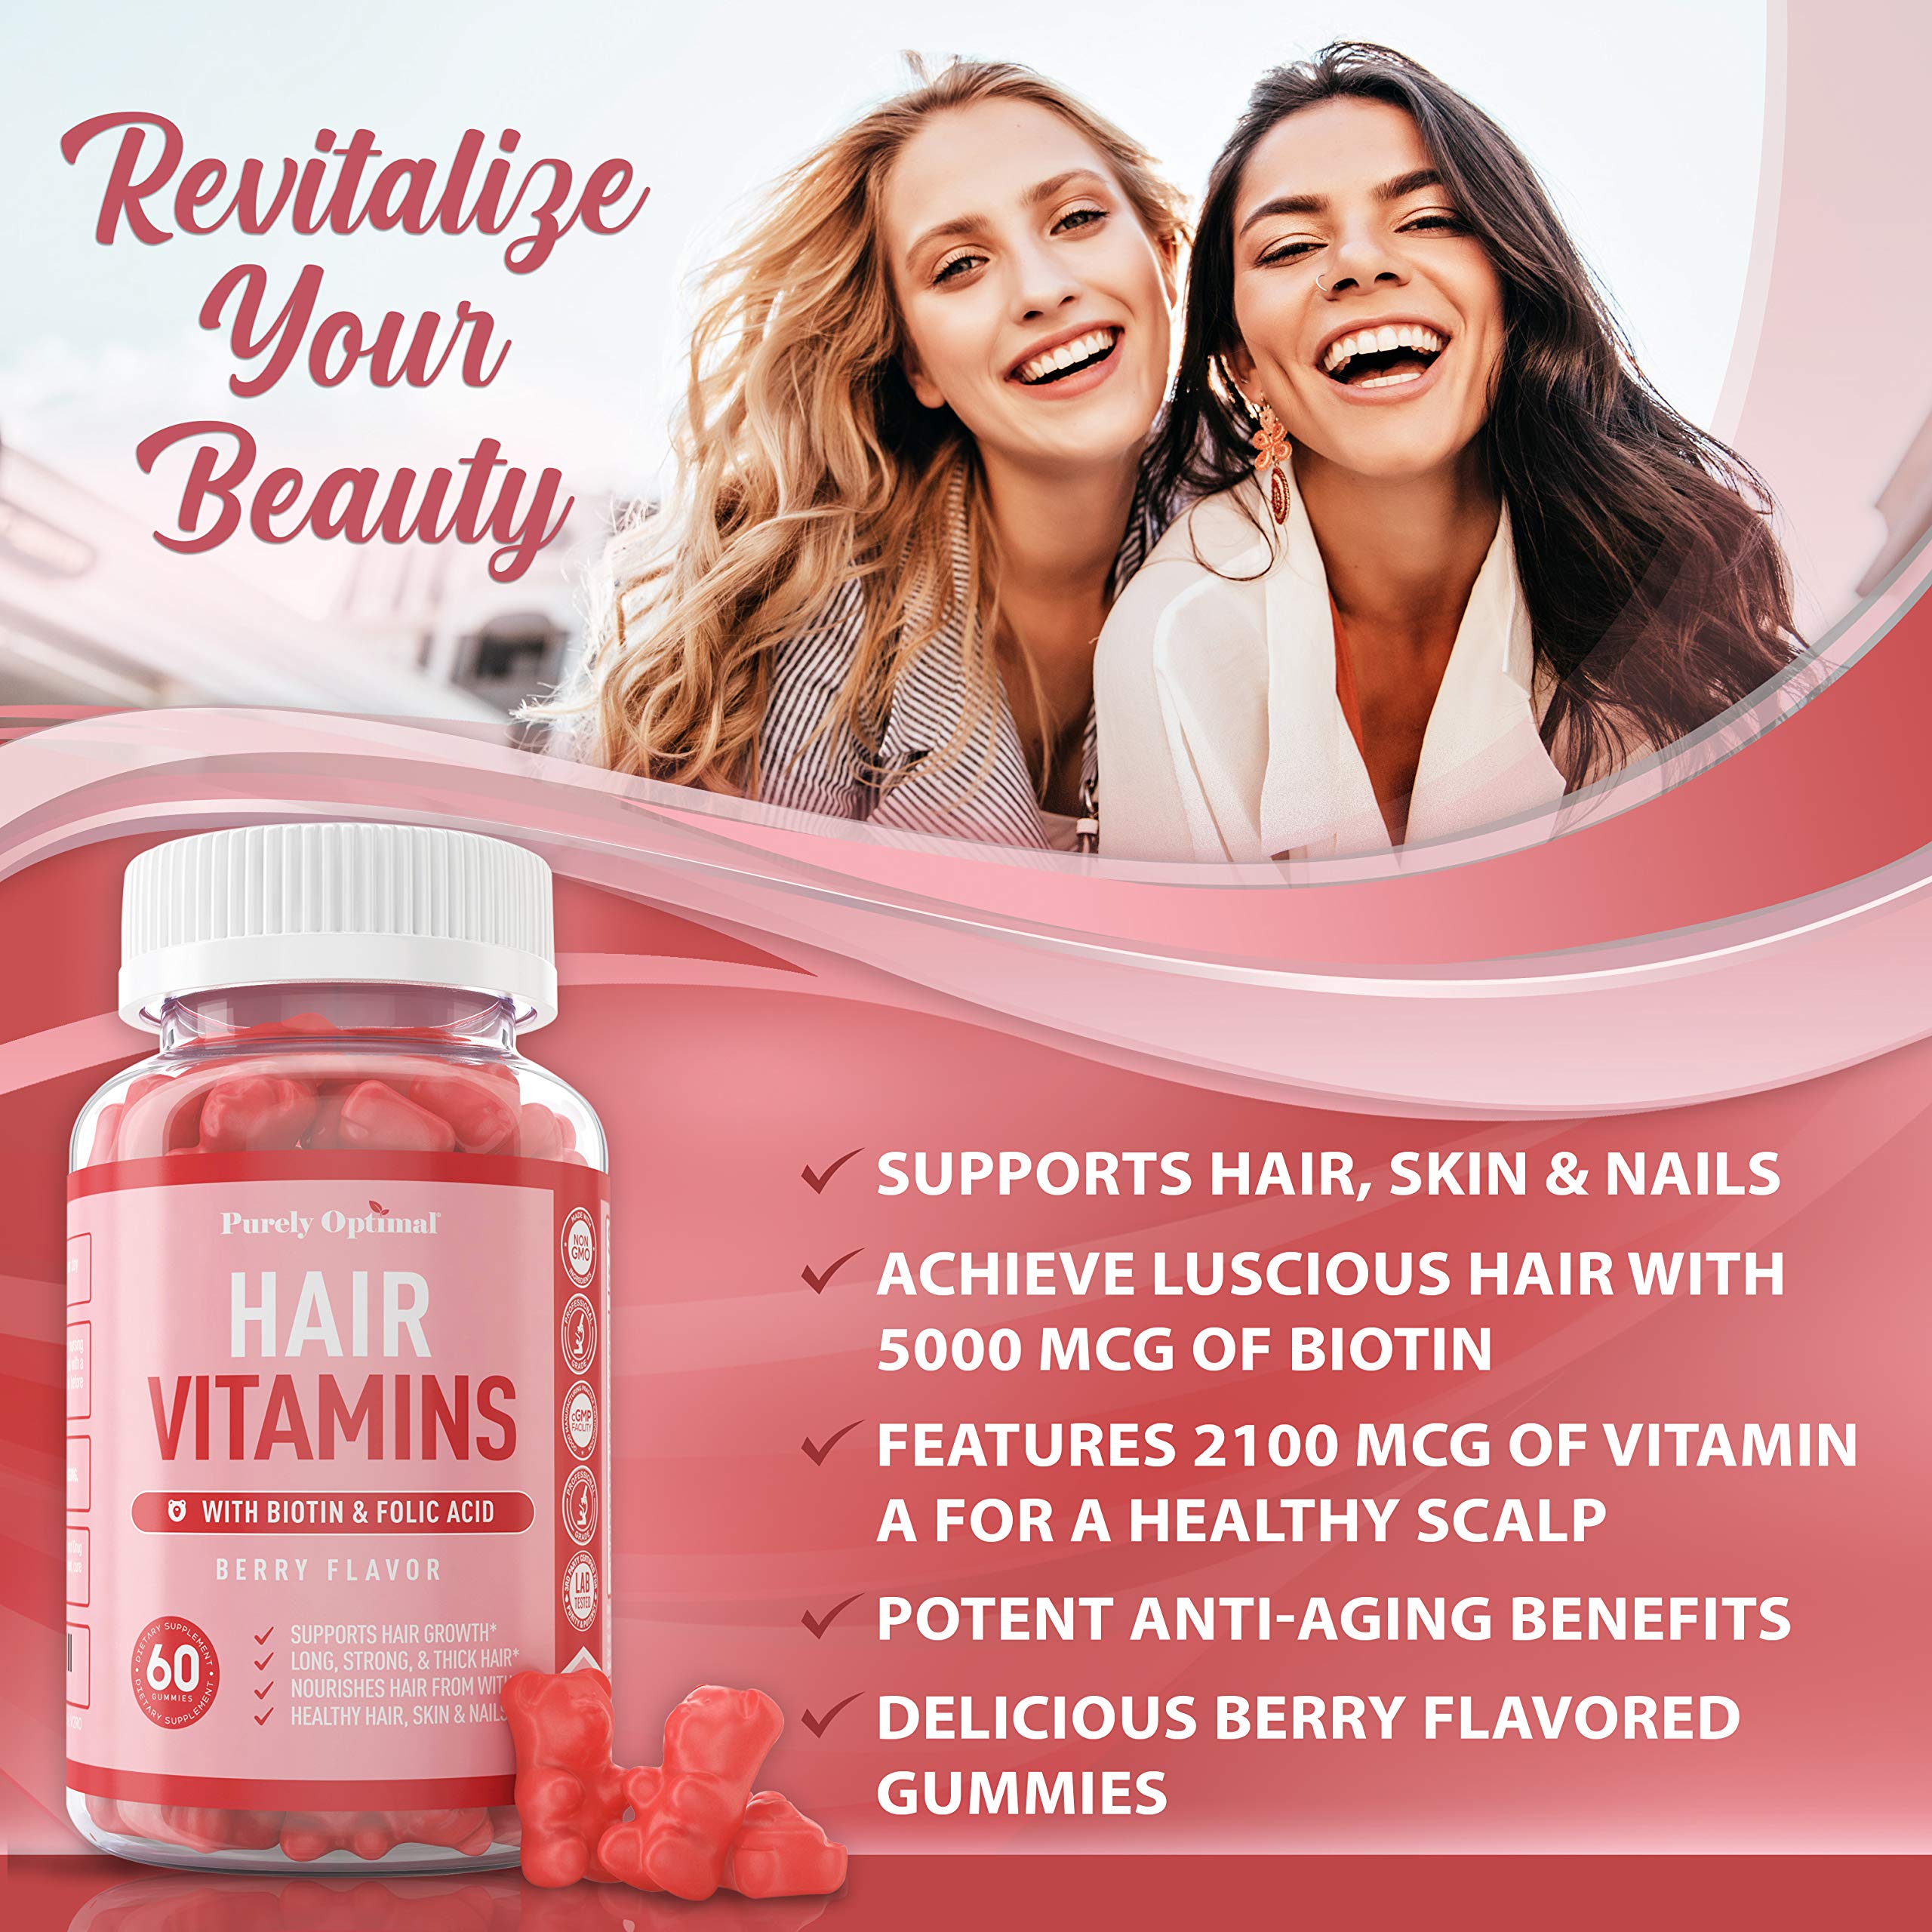 Mua Premium Hair Vitamins Supplement - Gummy Vitamins w/ Biotin, Folic Acid,  Vitamins A & D - Supports Faster Hair Growth and Promotes Healthy Hair,  Skin, and Nails - 60 Non-GMO Berry